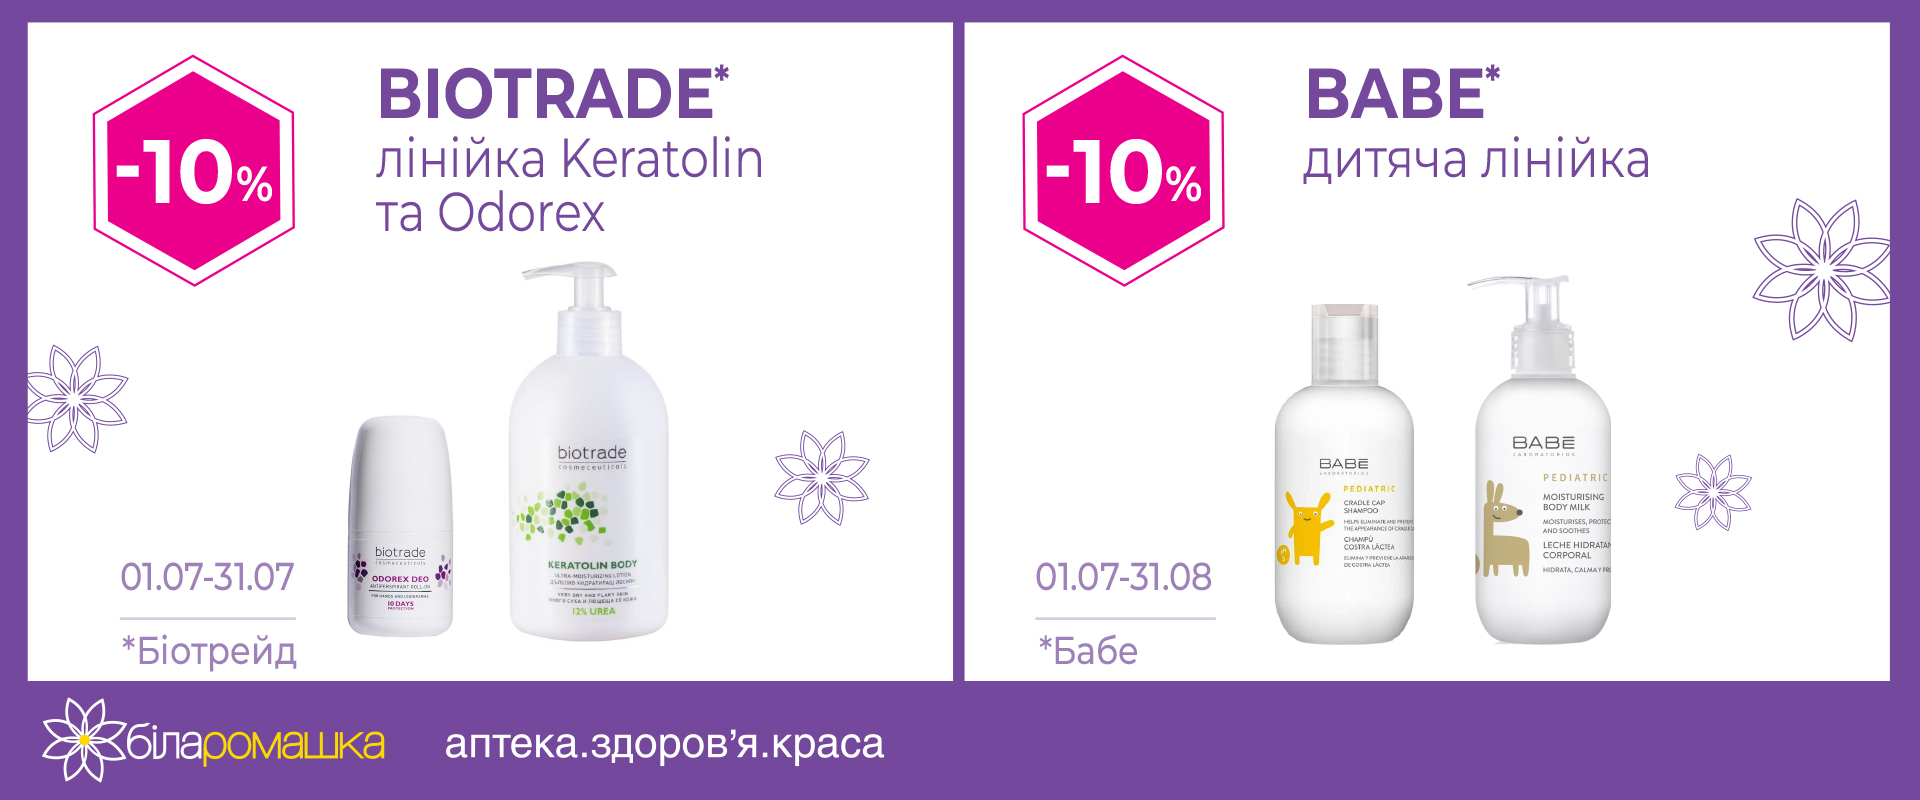 -10% discount on TM BIOTRADE products